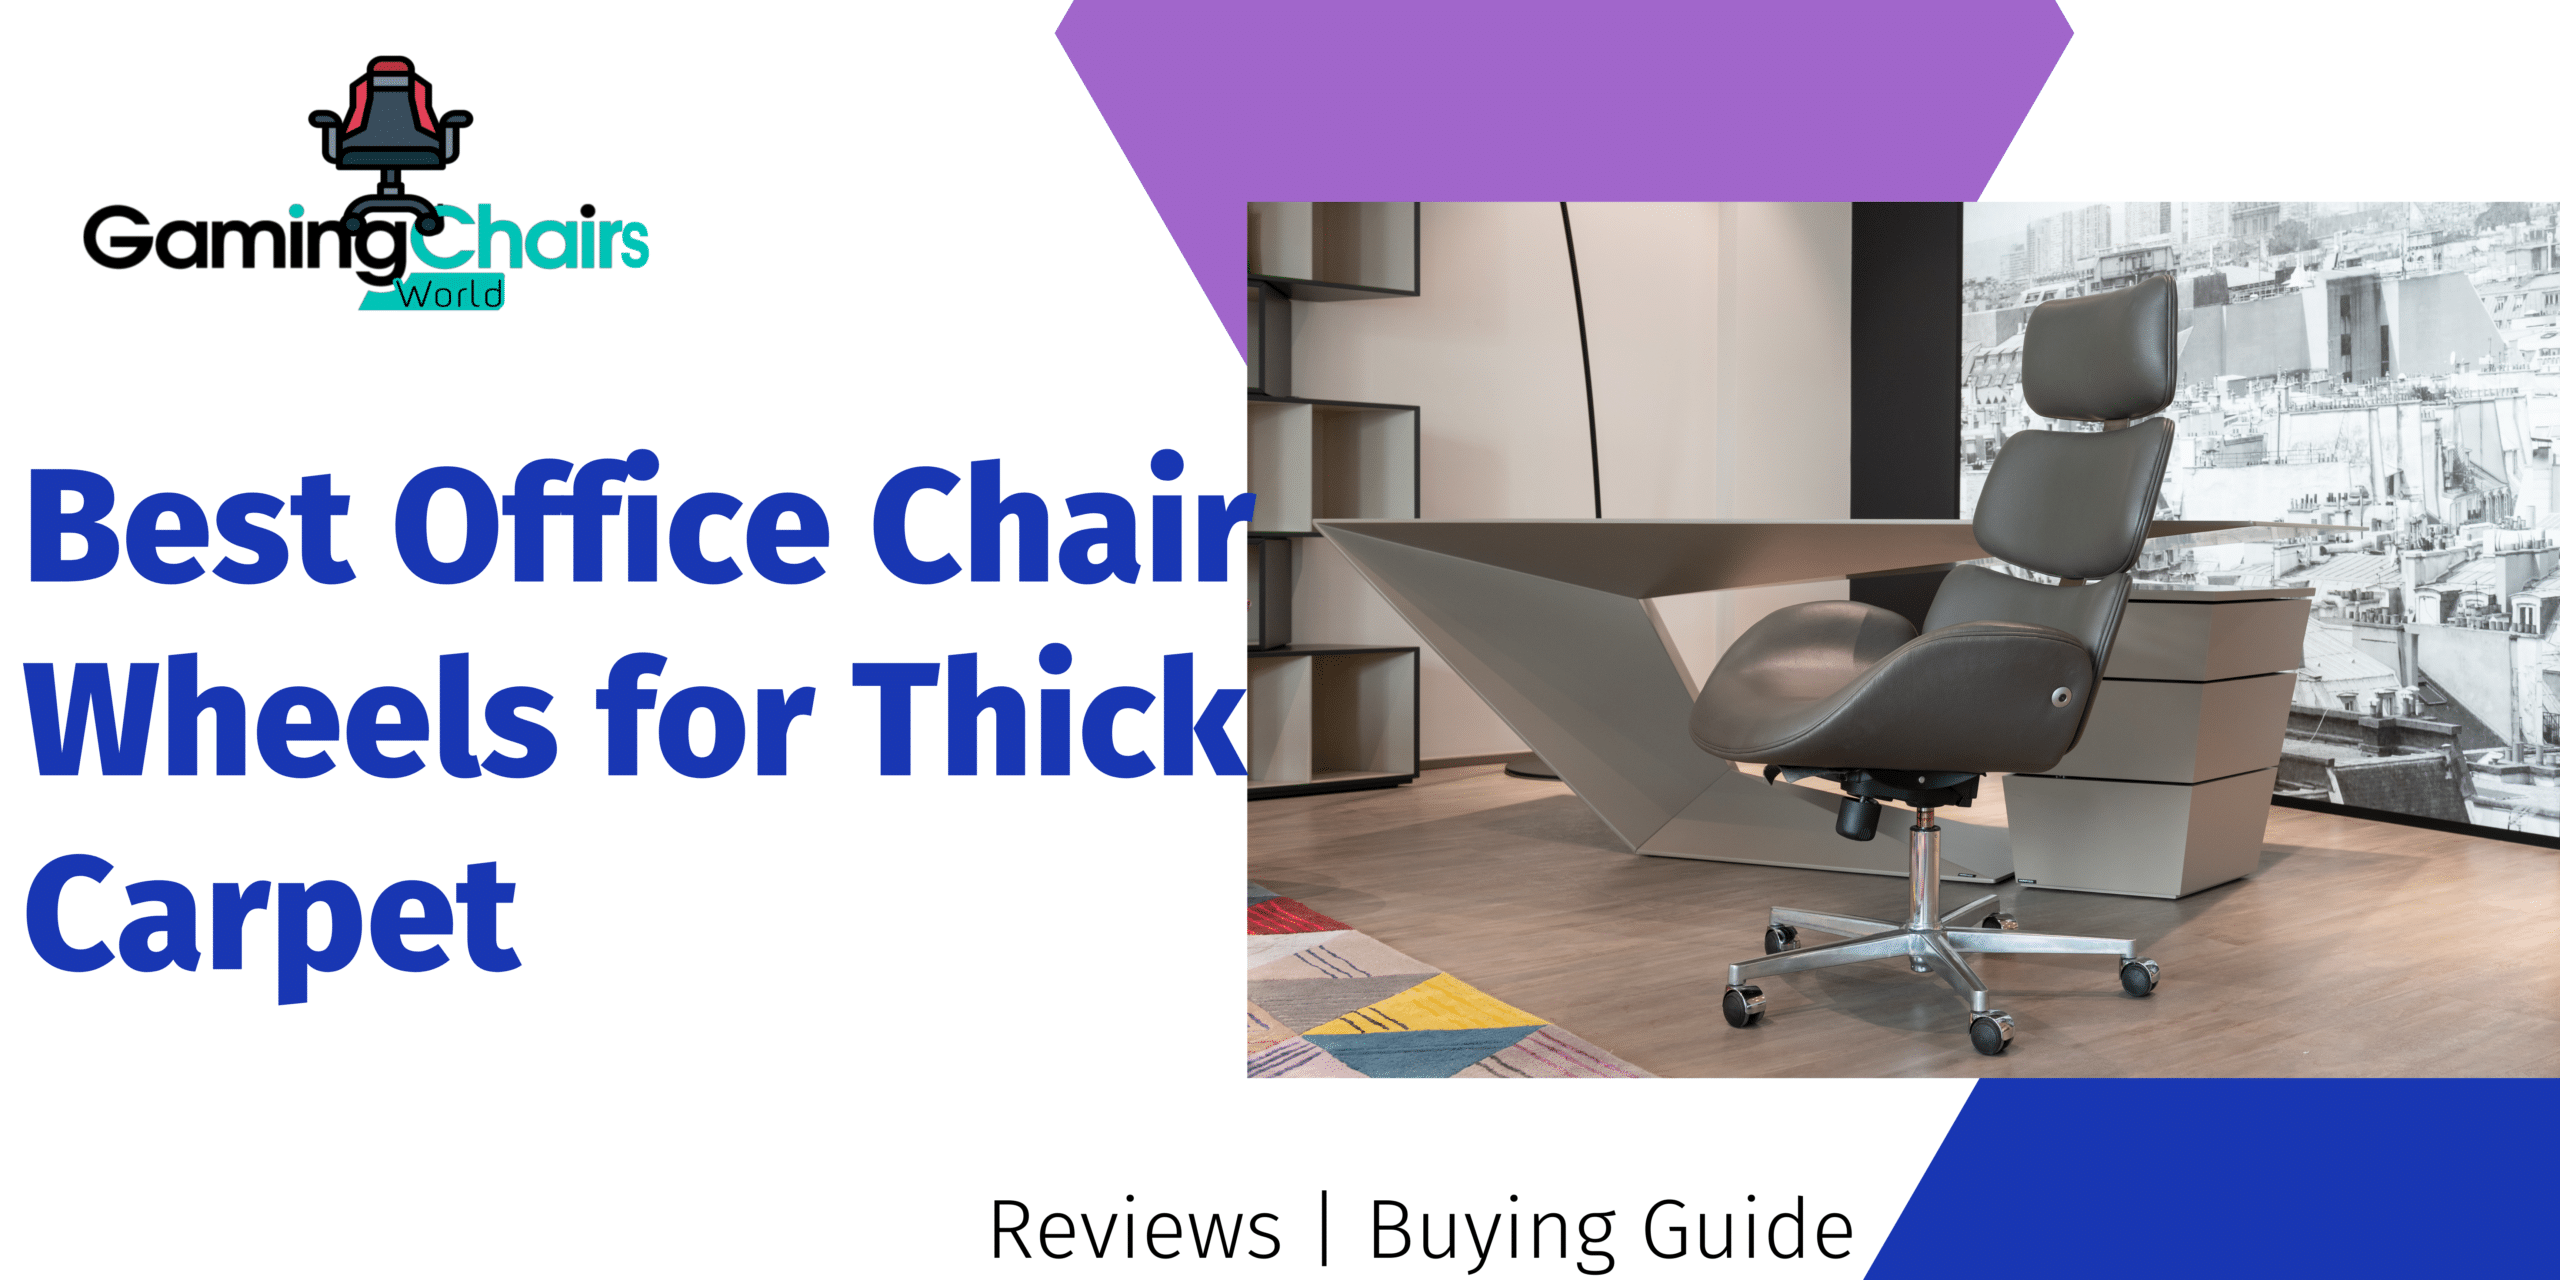 Best Office Chair Wheels for Thick Carpet